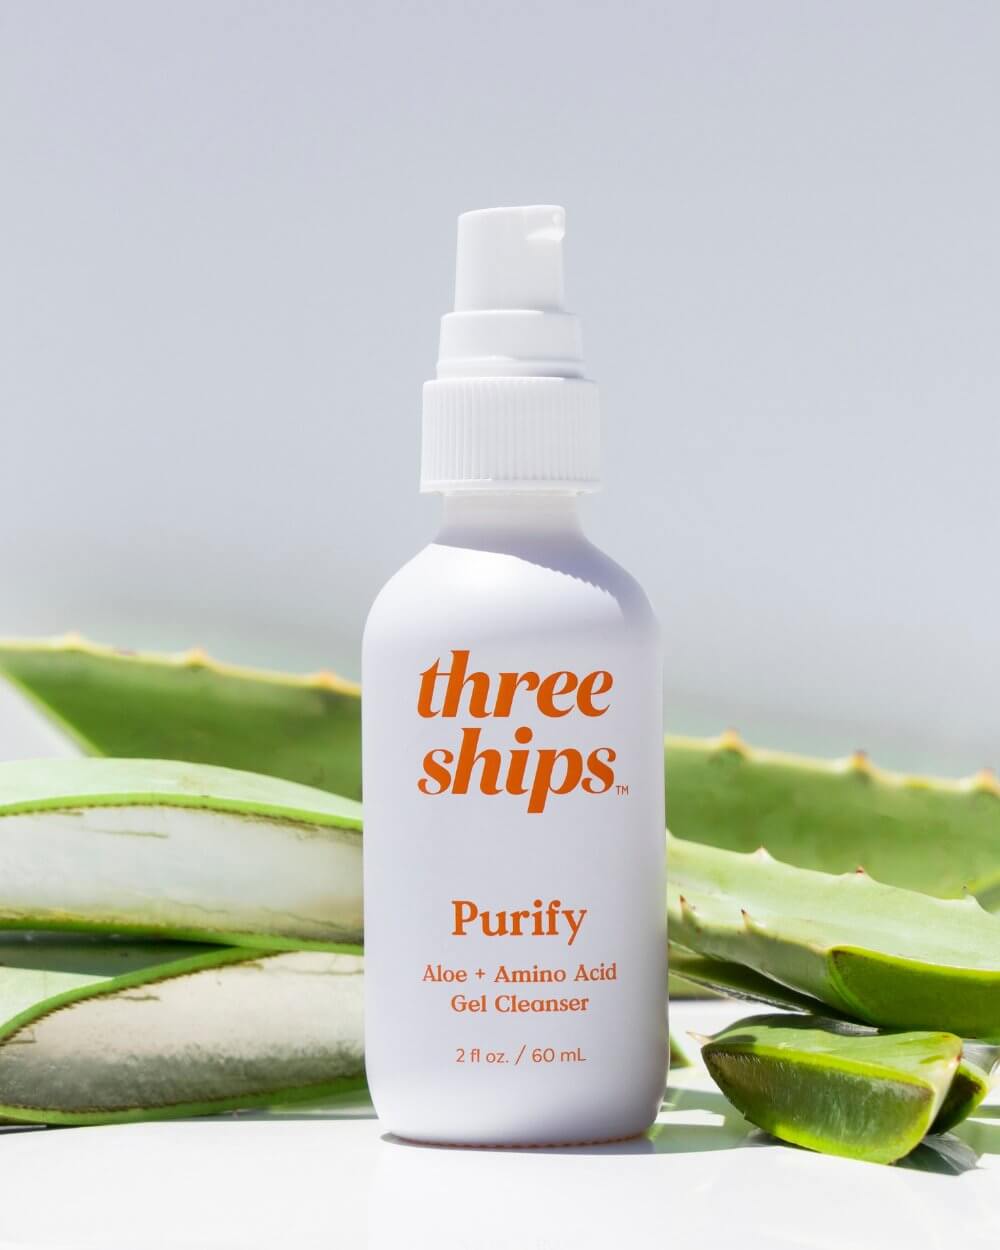 Purify Aloe + Amino Acid Gel Cleanser Three Ships CLEANSERS Natural Vegan Cruelty-free Skincare